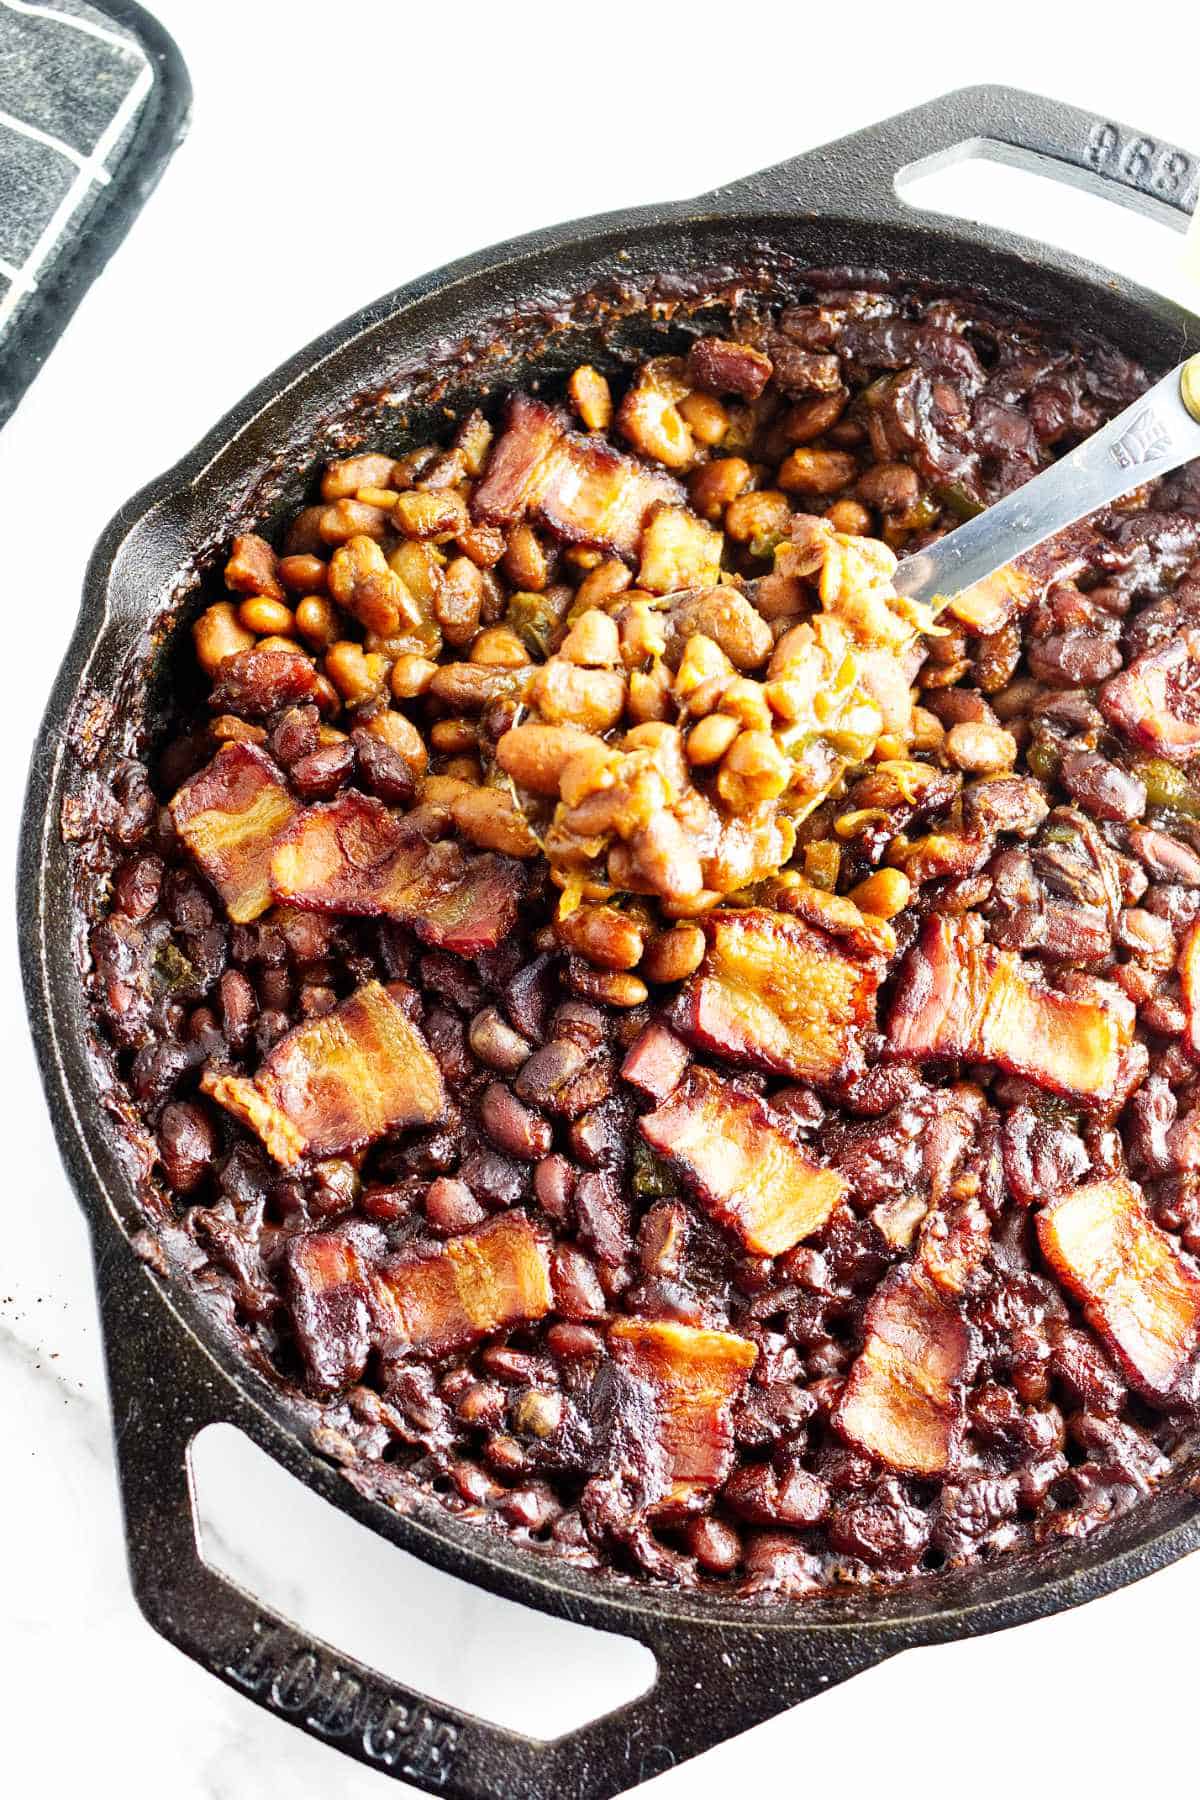 Smoked baked beans.